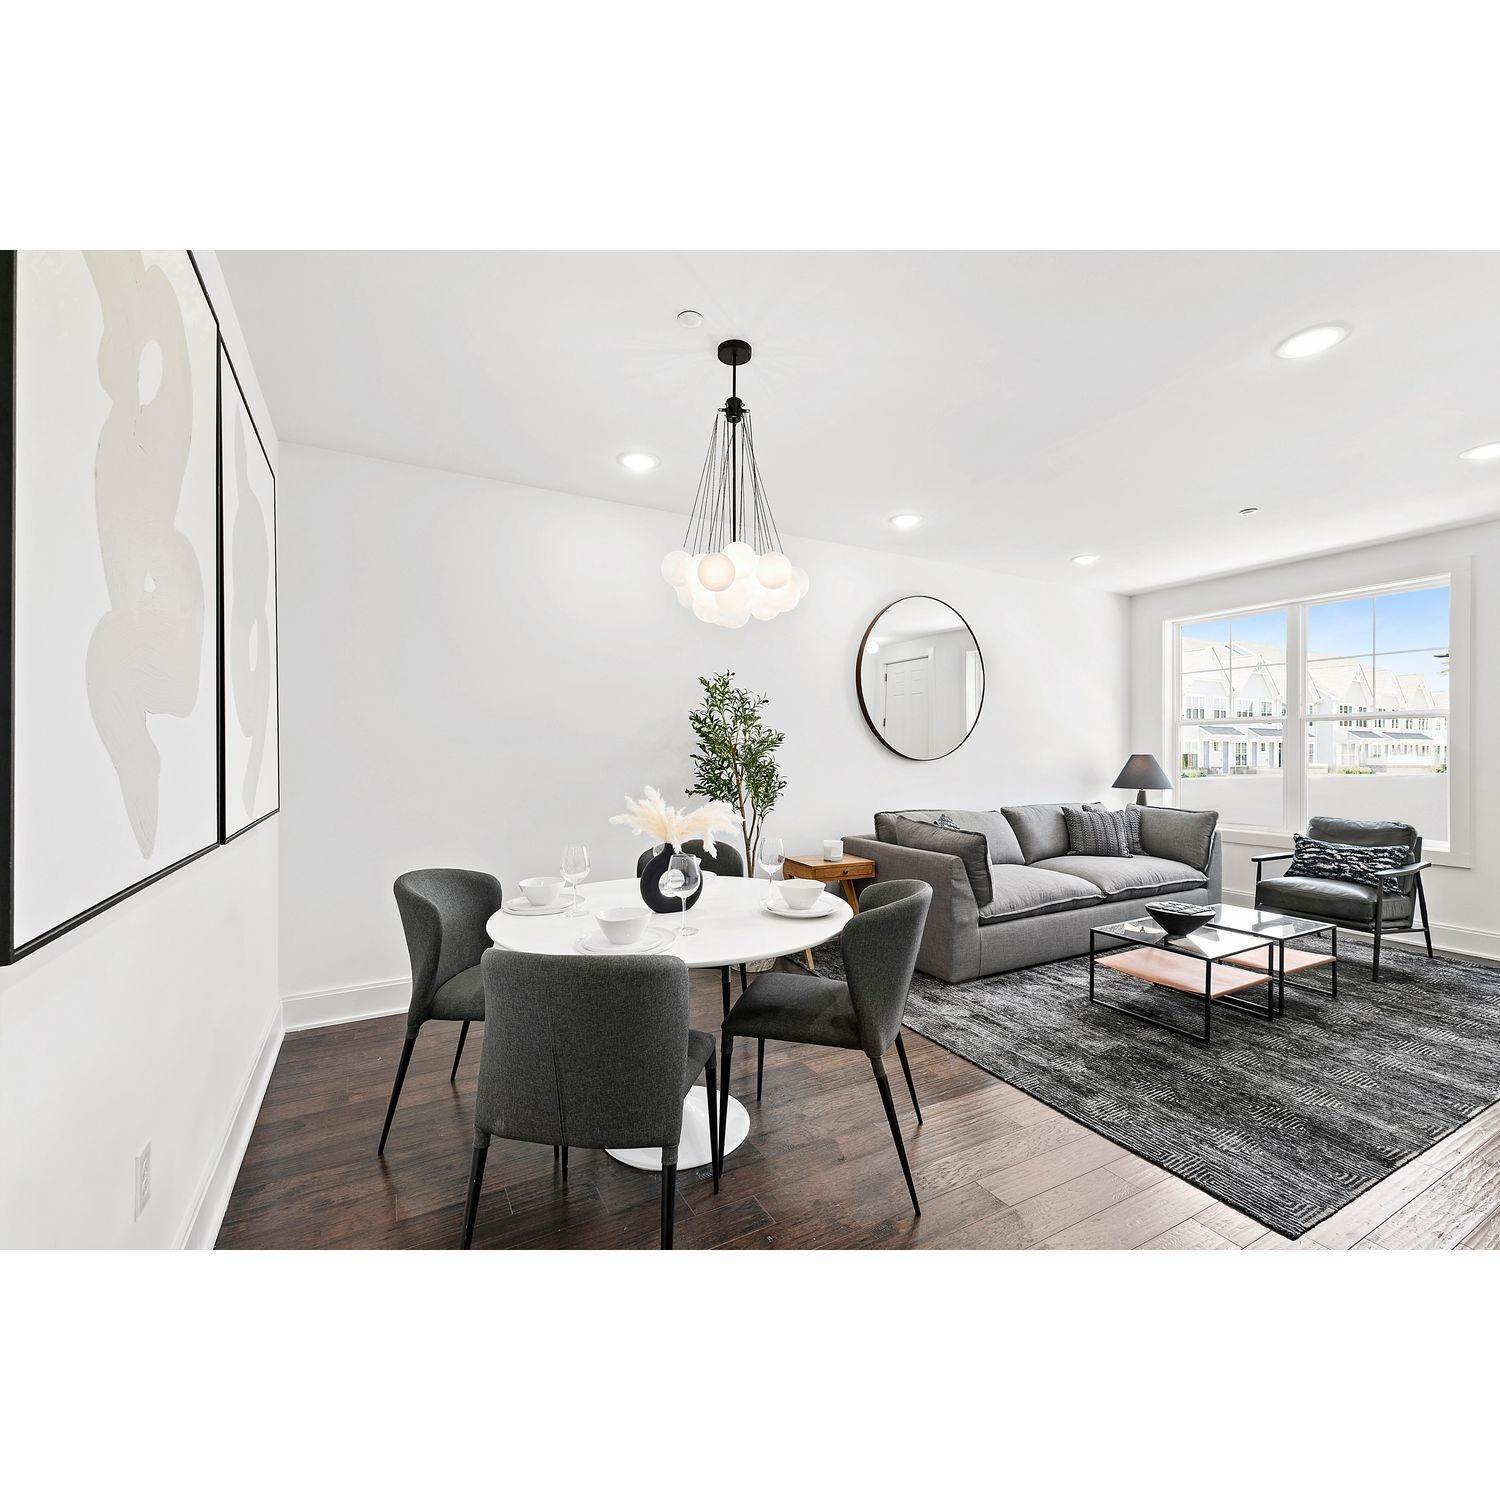 28. Meadowbrook Pointe East Meadow xây dựng tại 123 Merrick Avenue, East Meadow, NY 11554